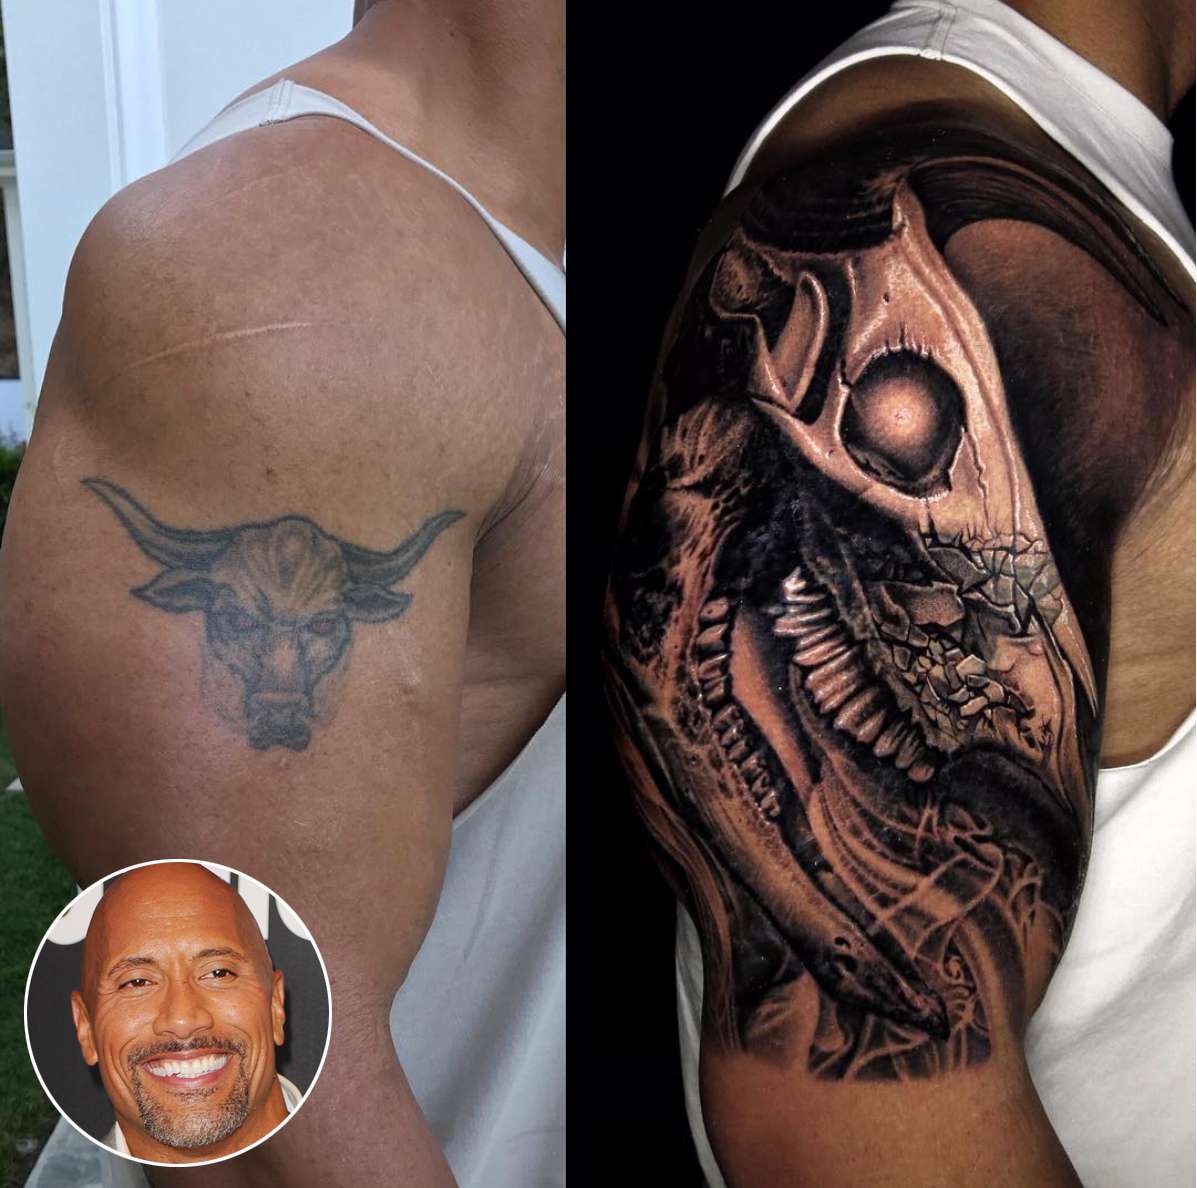 Dwayne 'The Rock' Johnson Changed His Iconic Bull Tattoo